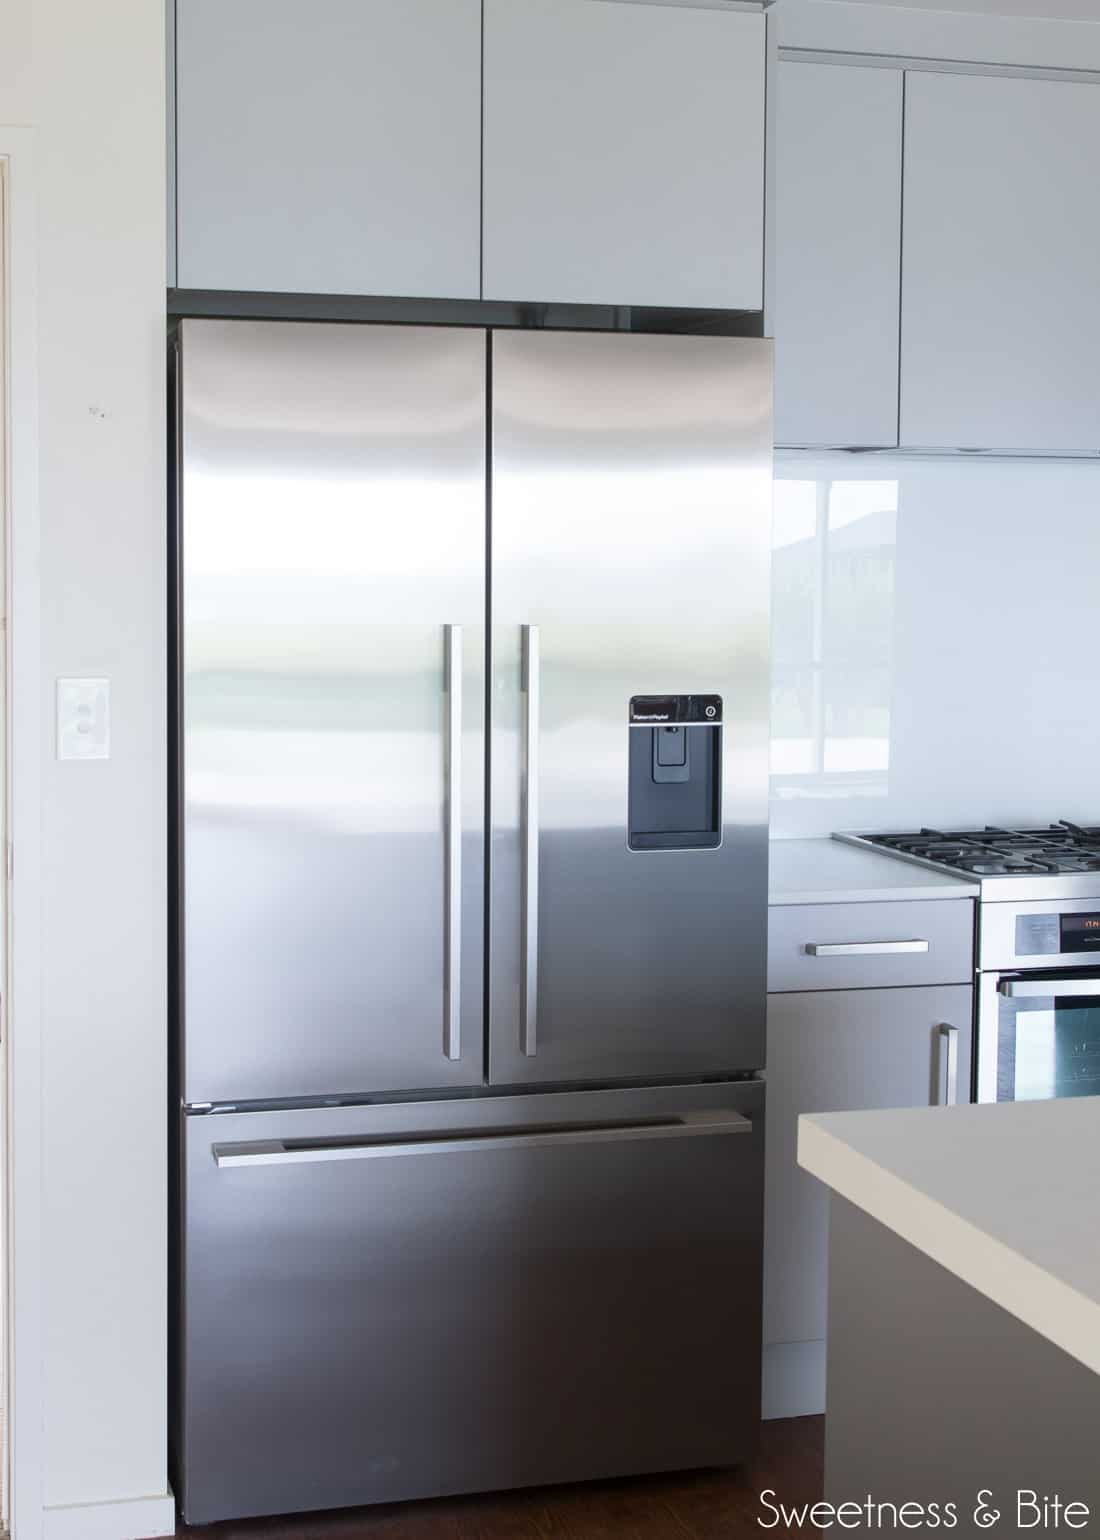 A 900mm wide Fisher and Paykel french door fridge. 